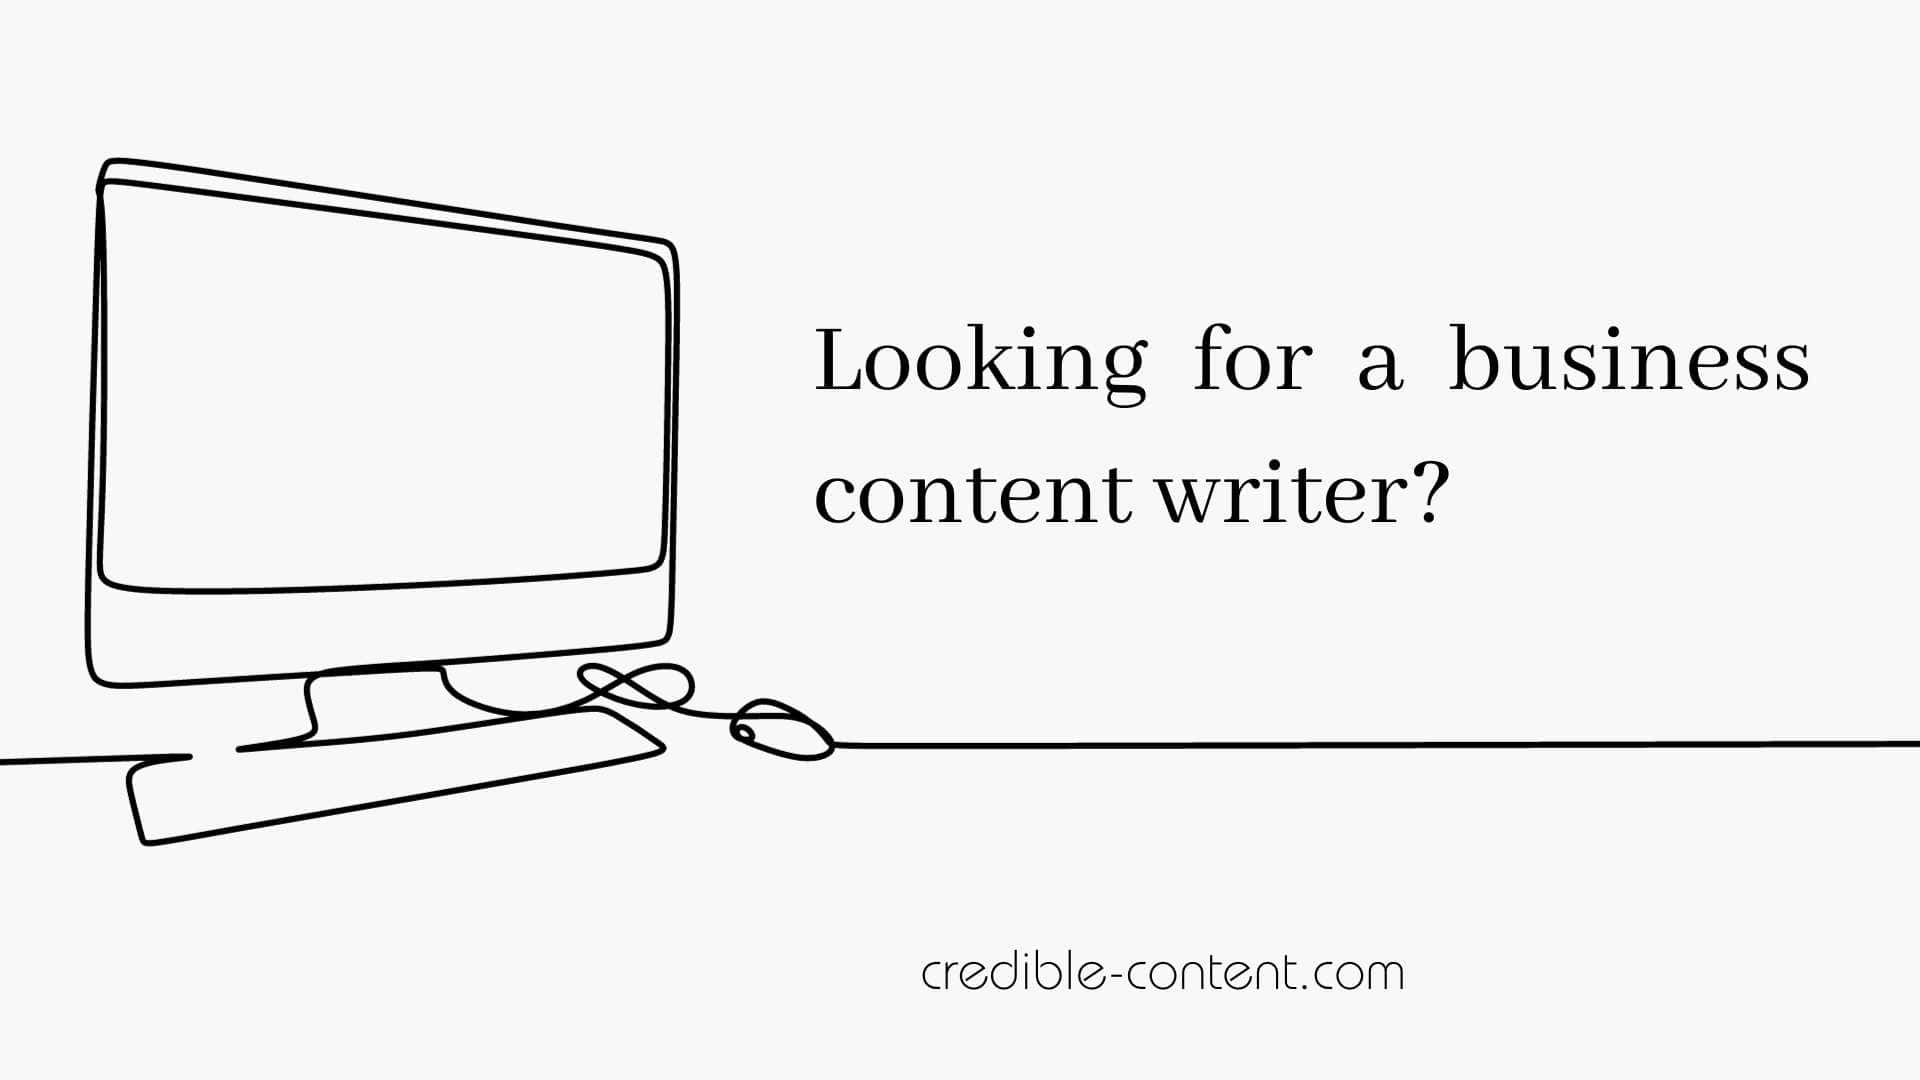 Looking for a business content writer